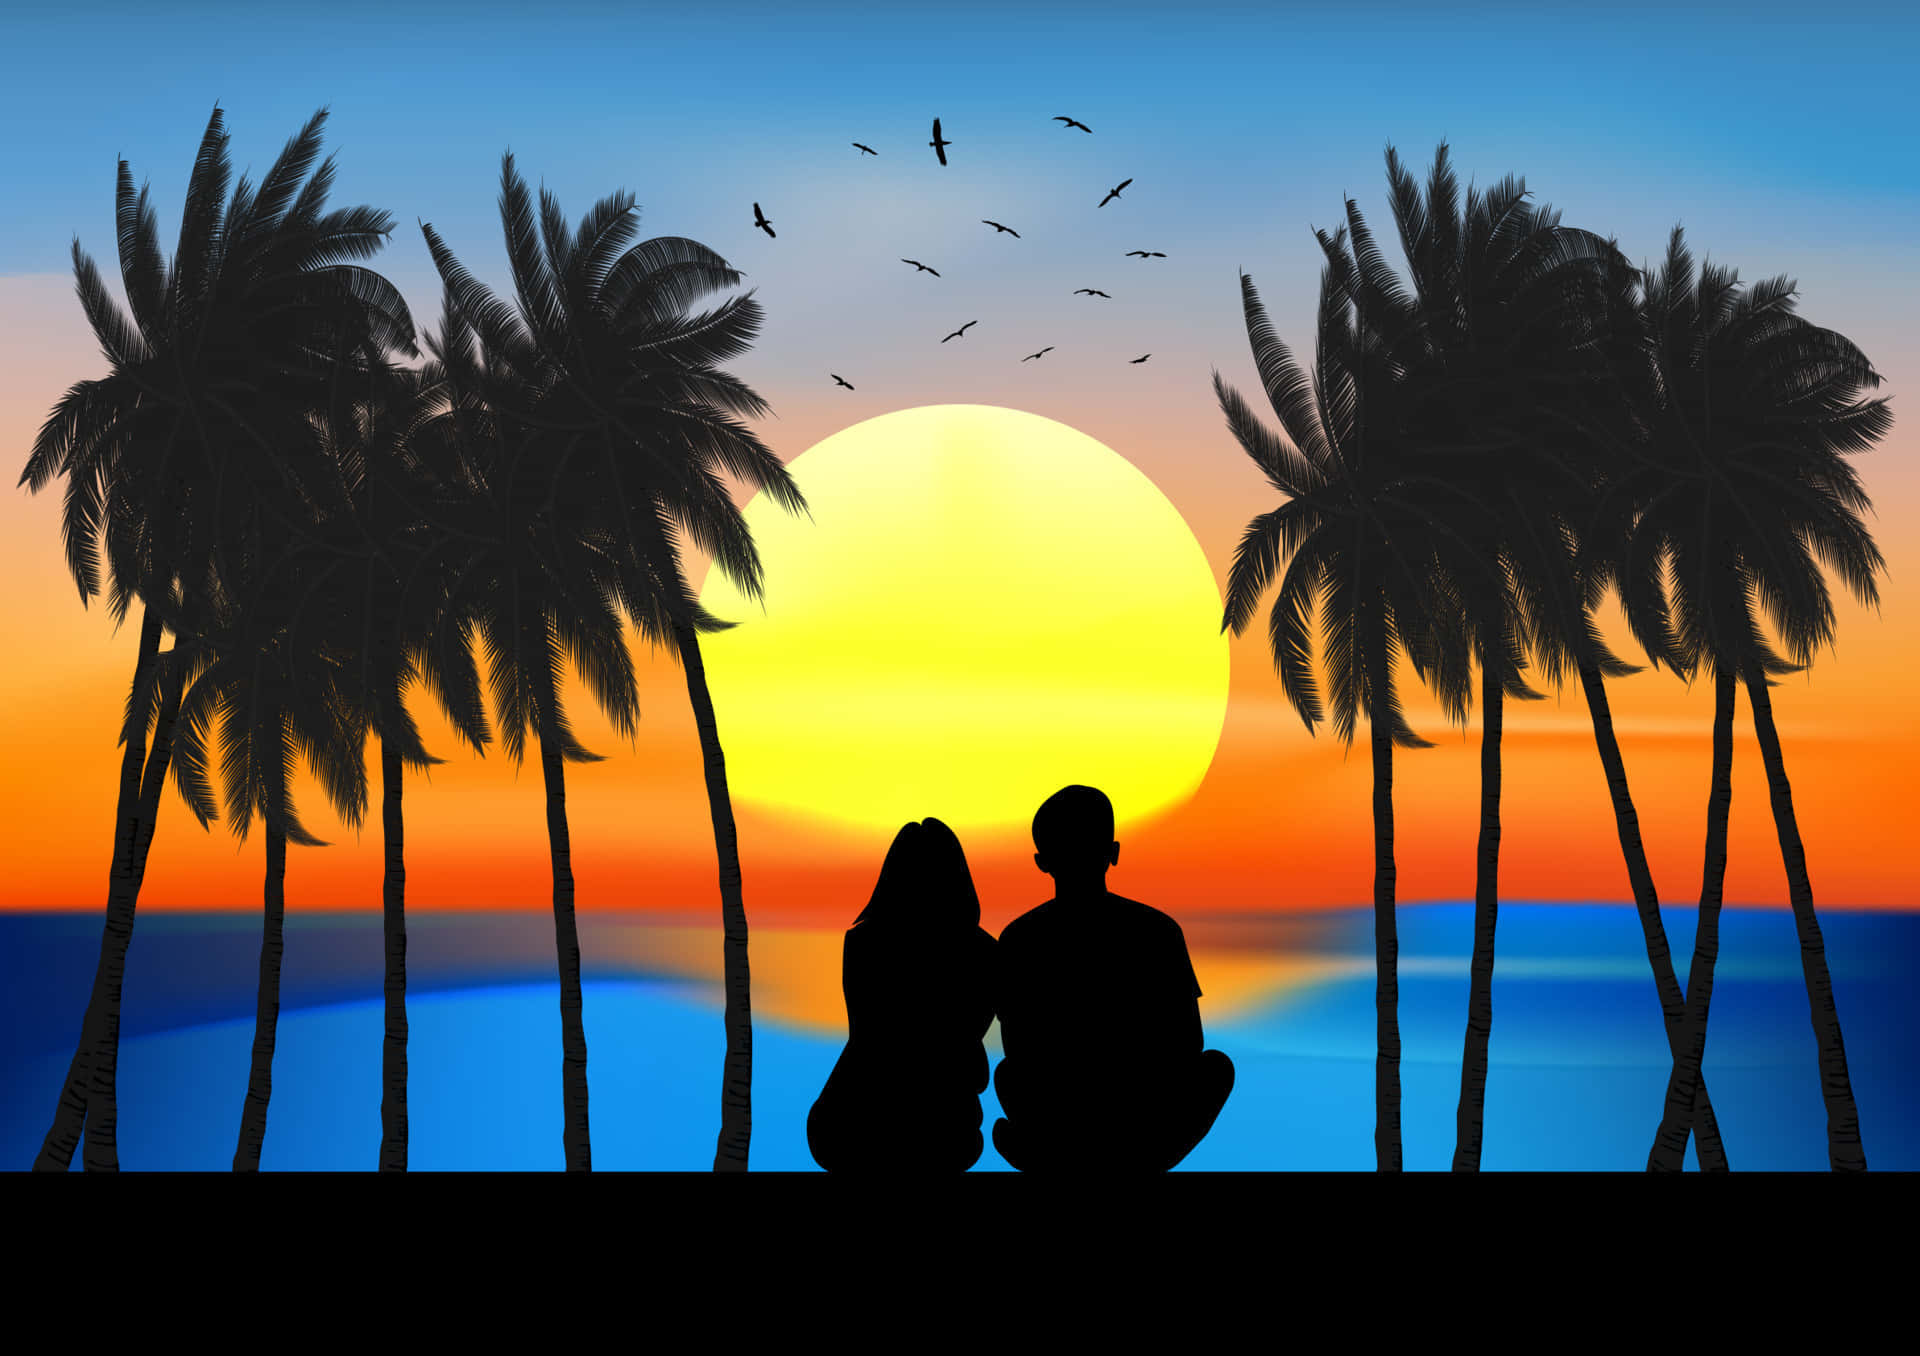 Couple Sunset Silhouette With Palm Trees By Beach Picture